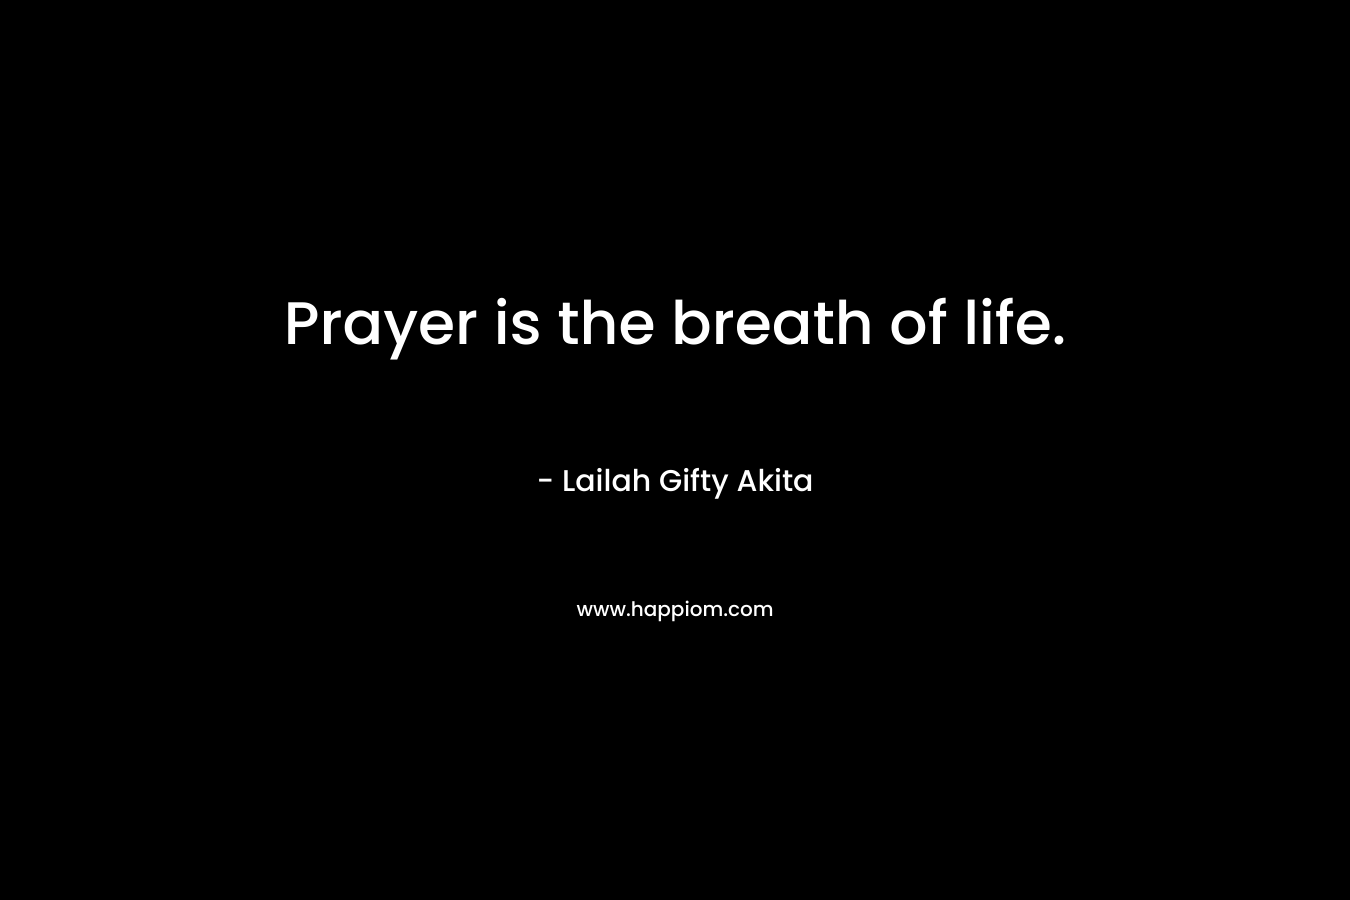 Prayer is the breath of life.